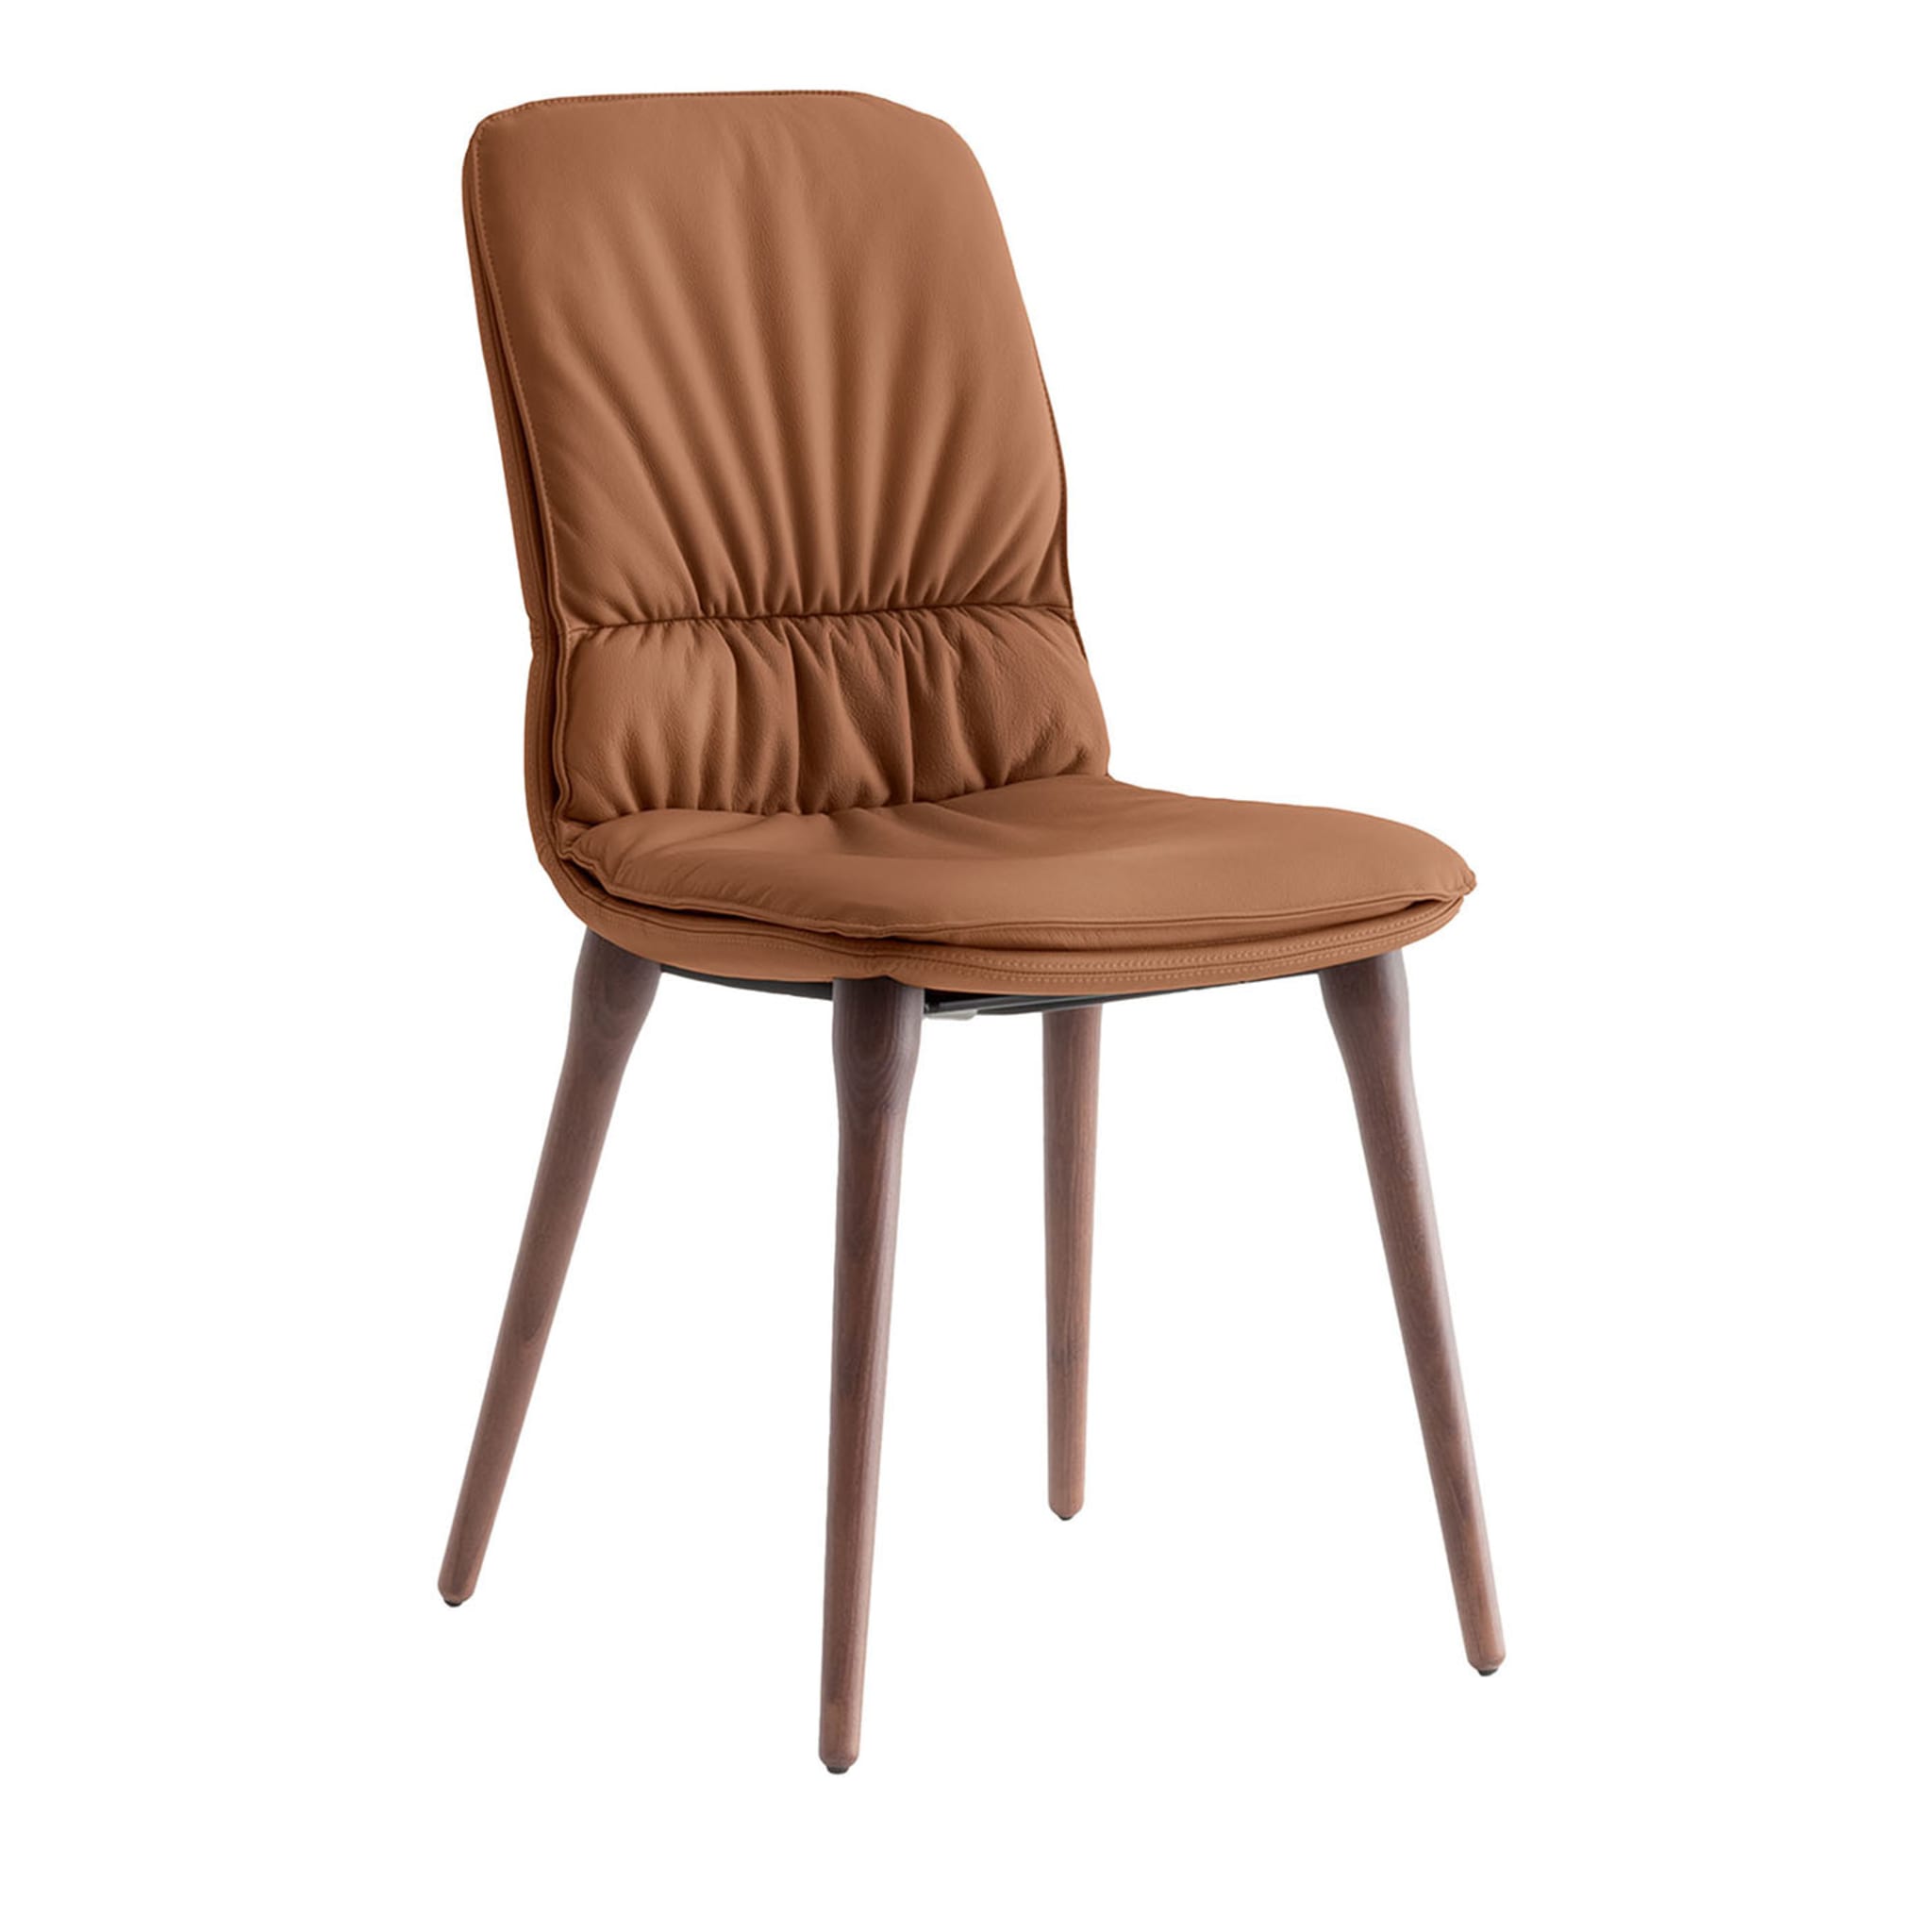 Coco Cognac-Toned Leather Chair - Main view